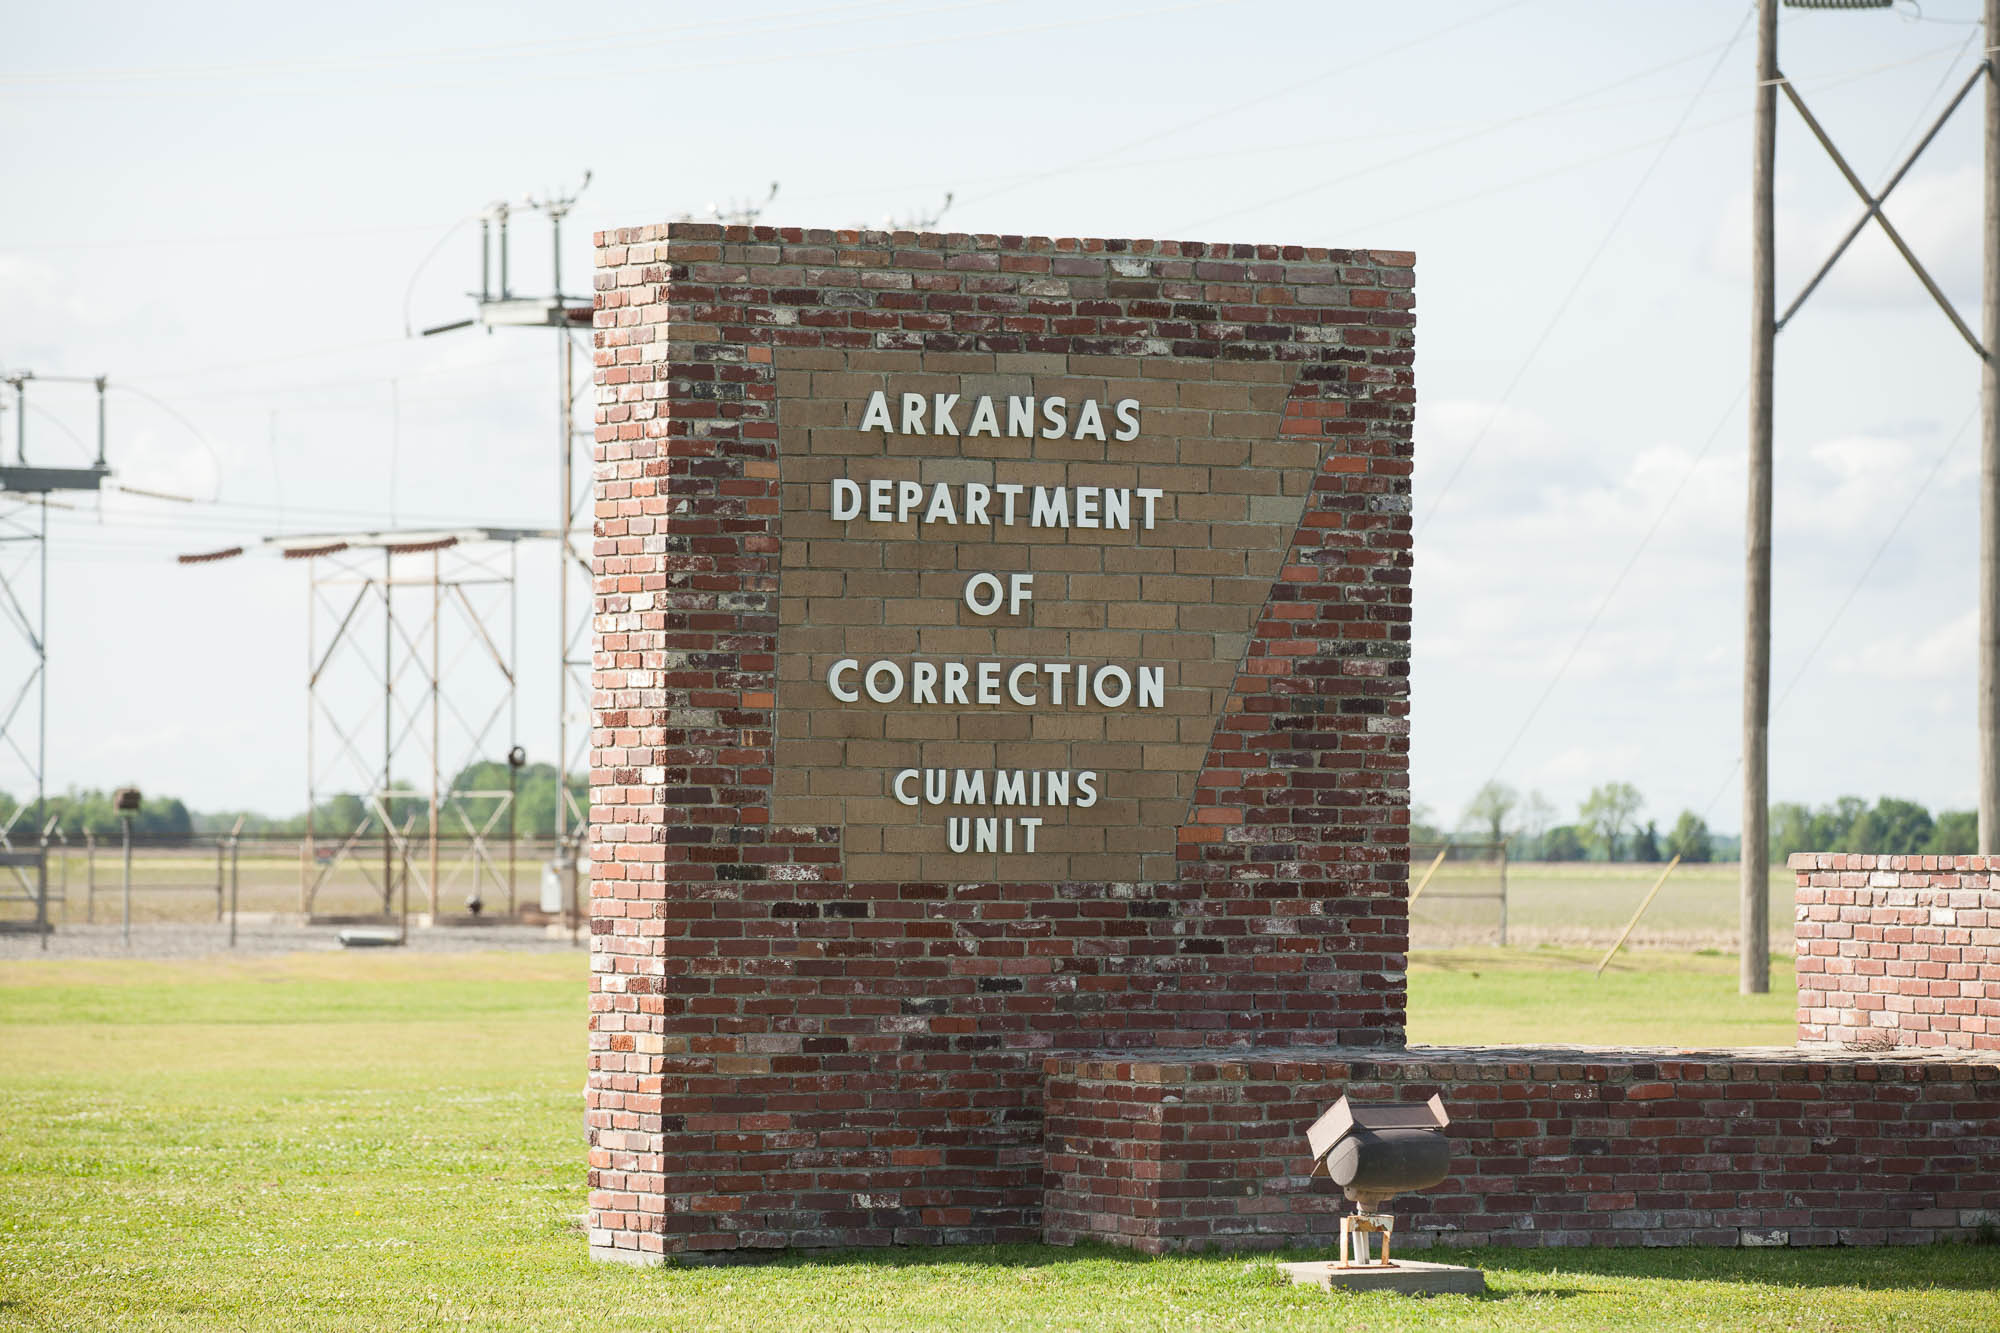 Entrance to the Cummins unit, where executions take place in Arkansas